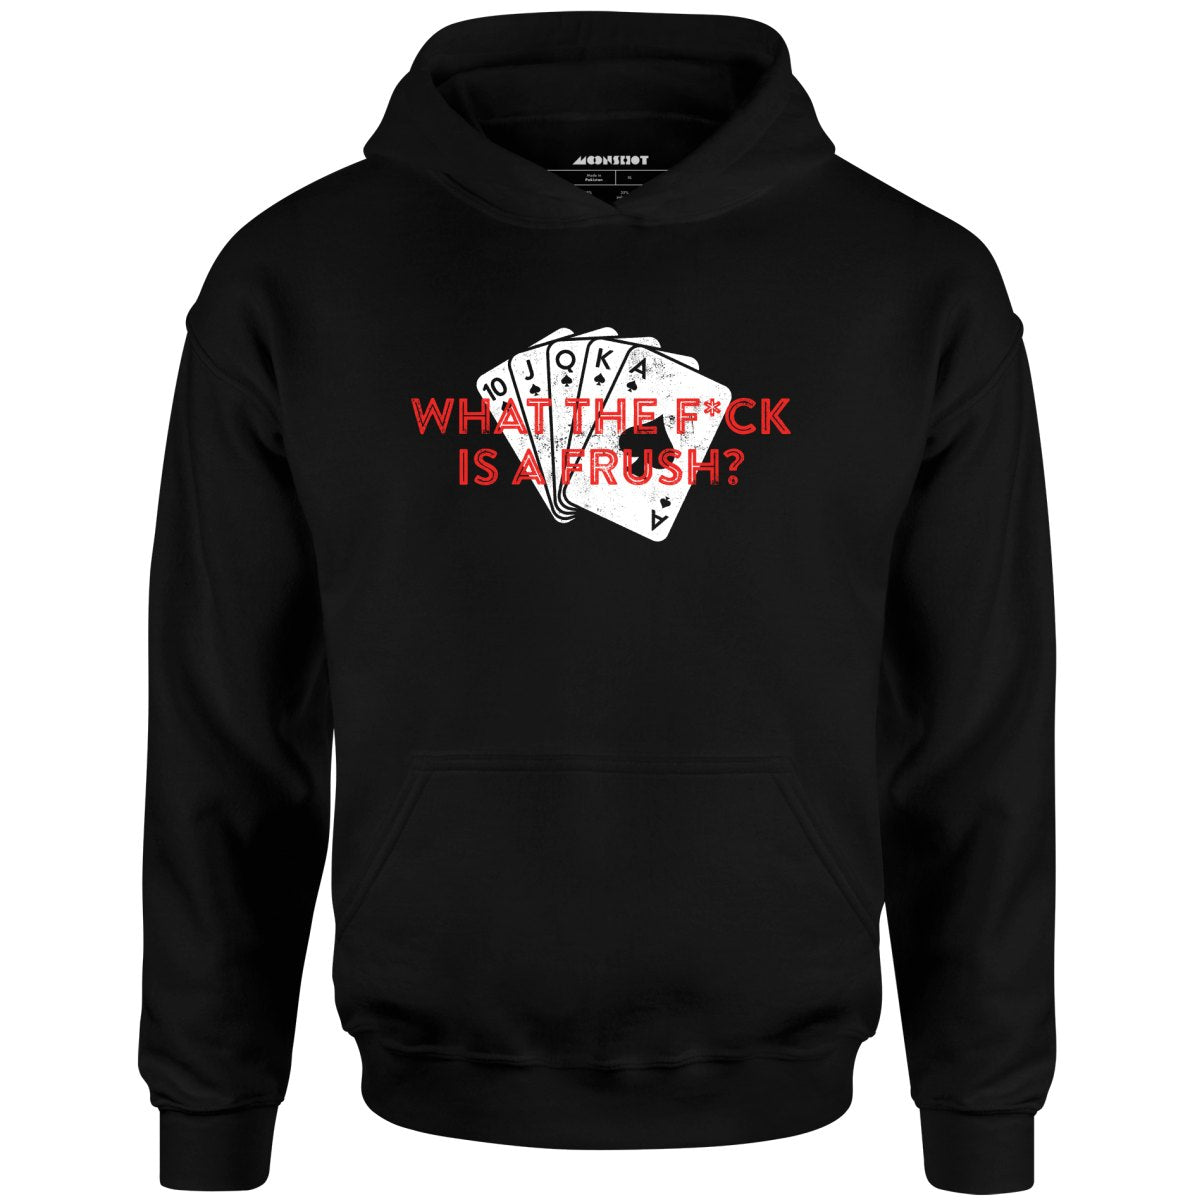 What The F*ck is a Frush? - Unisex Hoodie